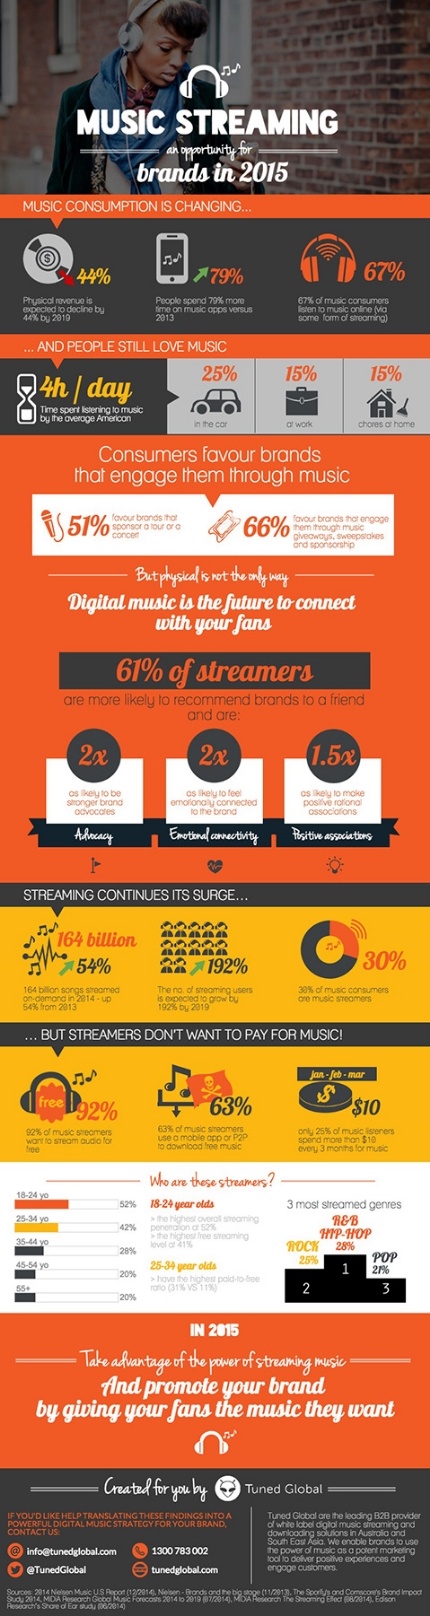 Tuned Global's infographic "Streaming is an opportunity for brands